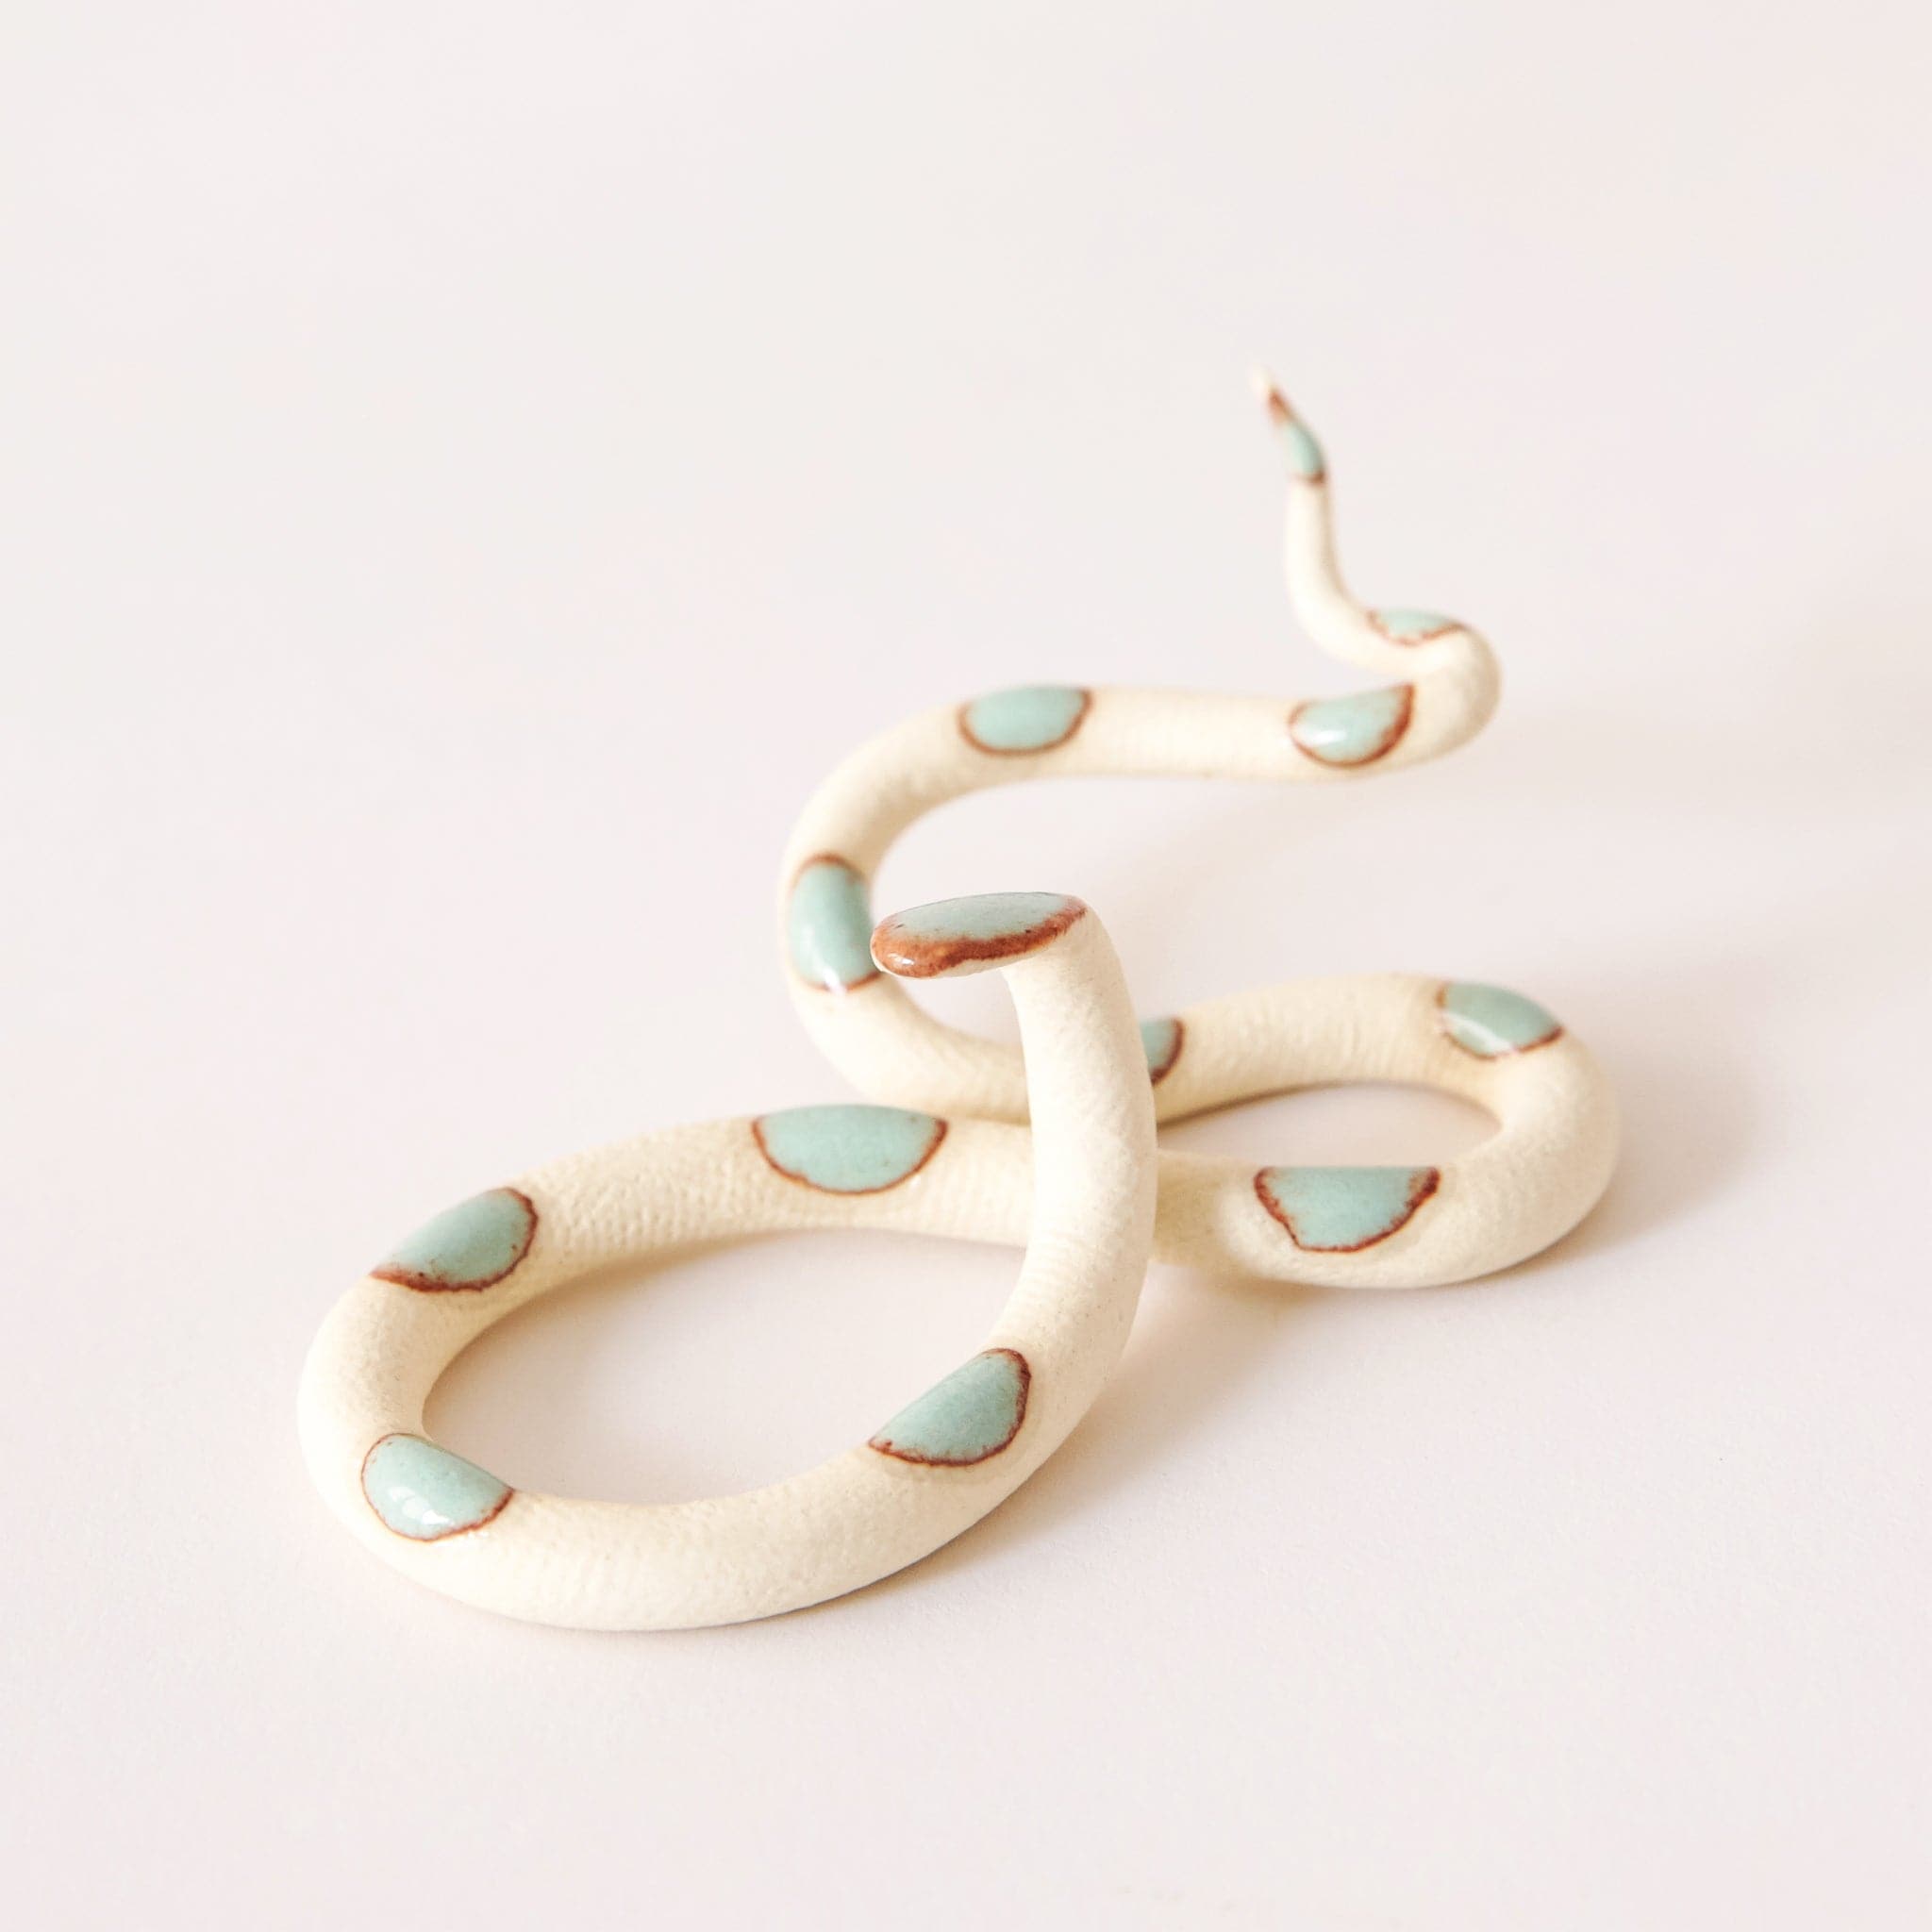 Sitting against a white background is a ceramic, cream snake. The snake's body twists multiple times from head to tail. There are brown bordered turquoise circles on the top of the snake. 